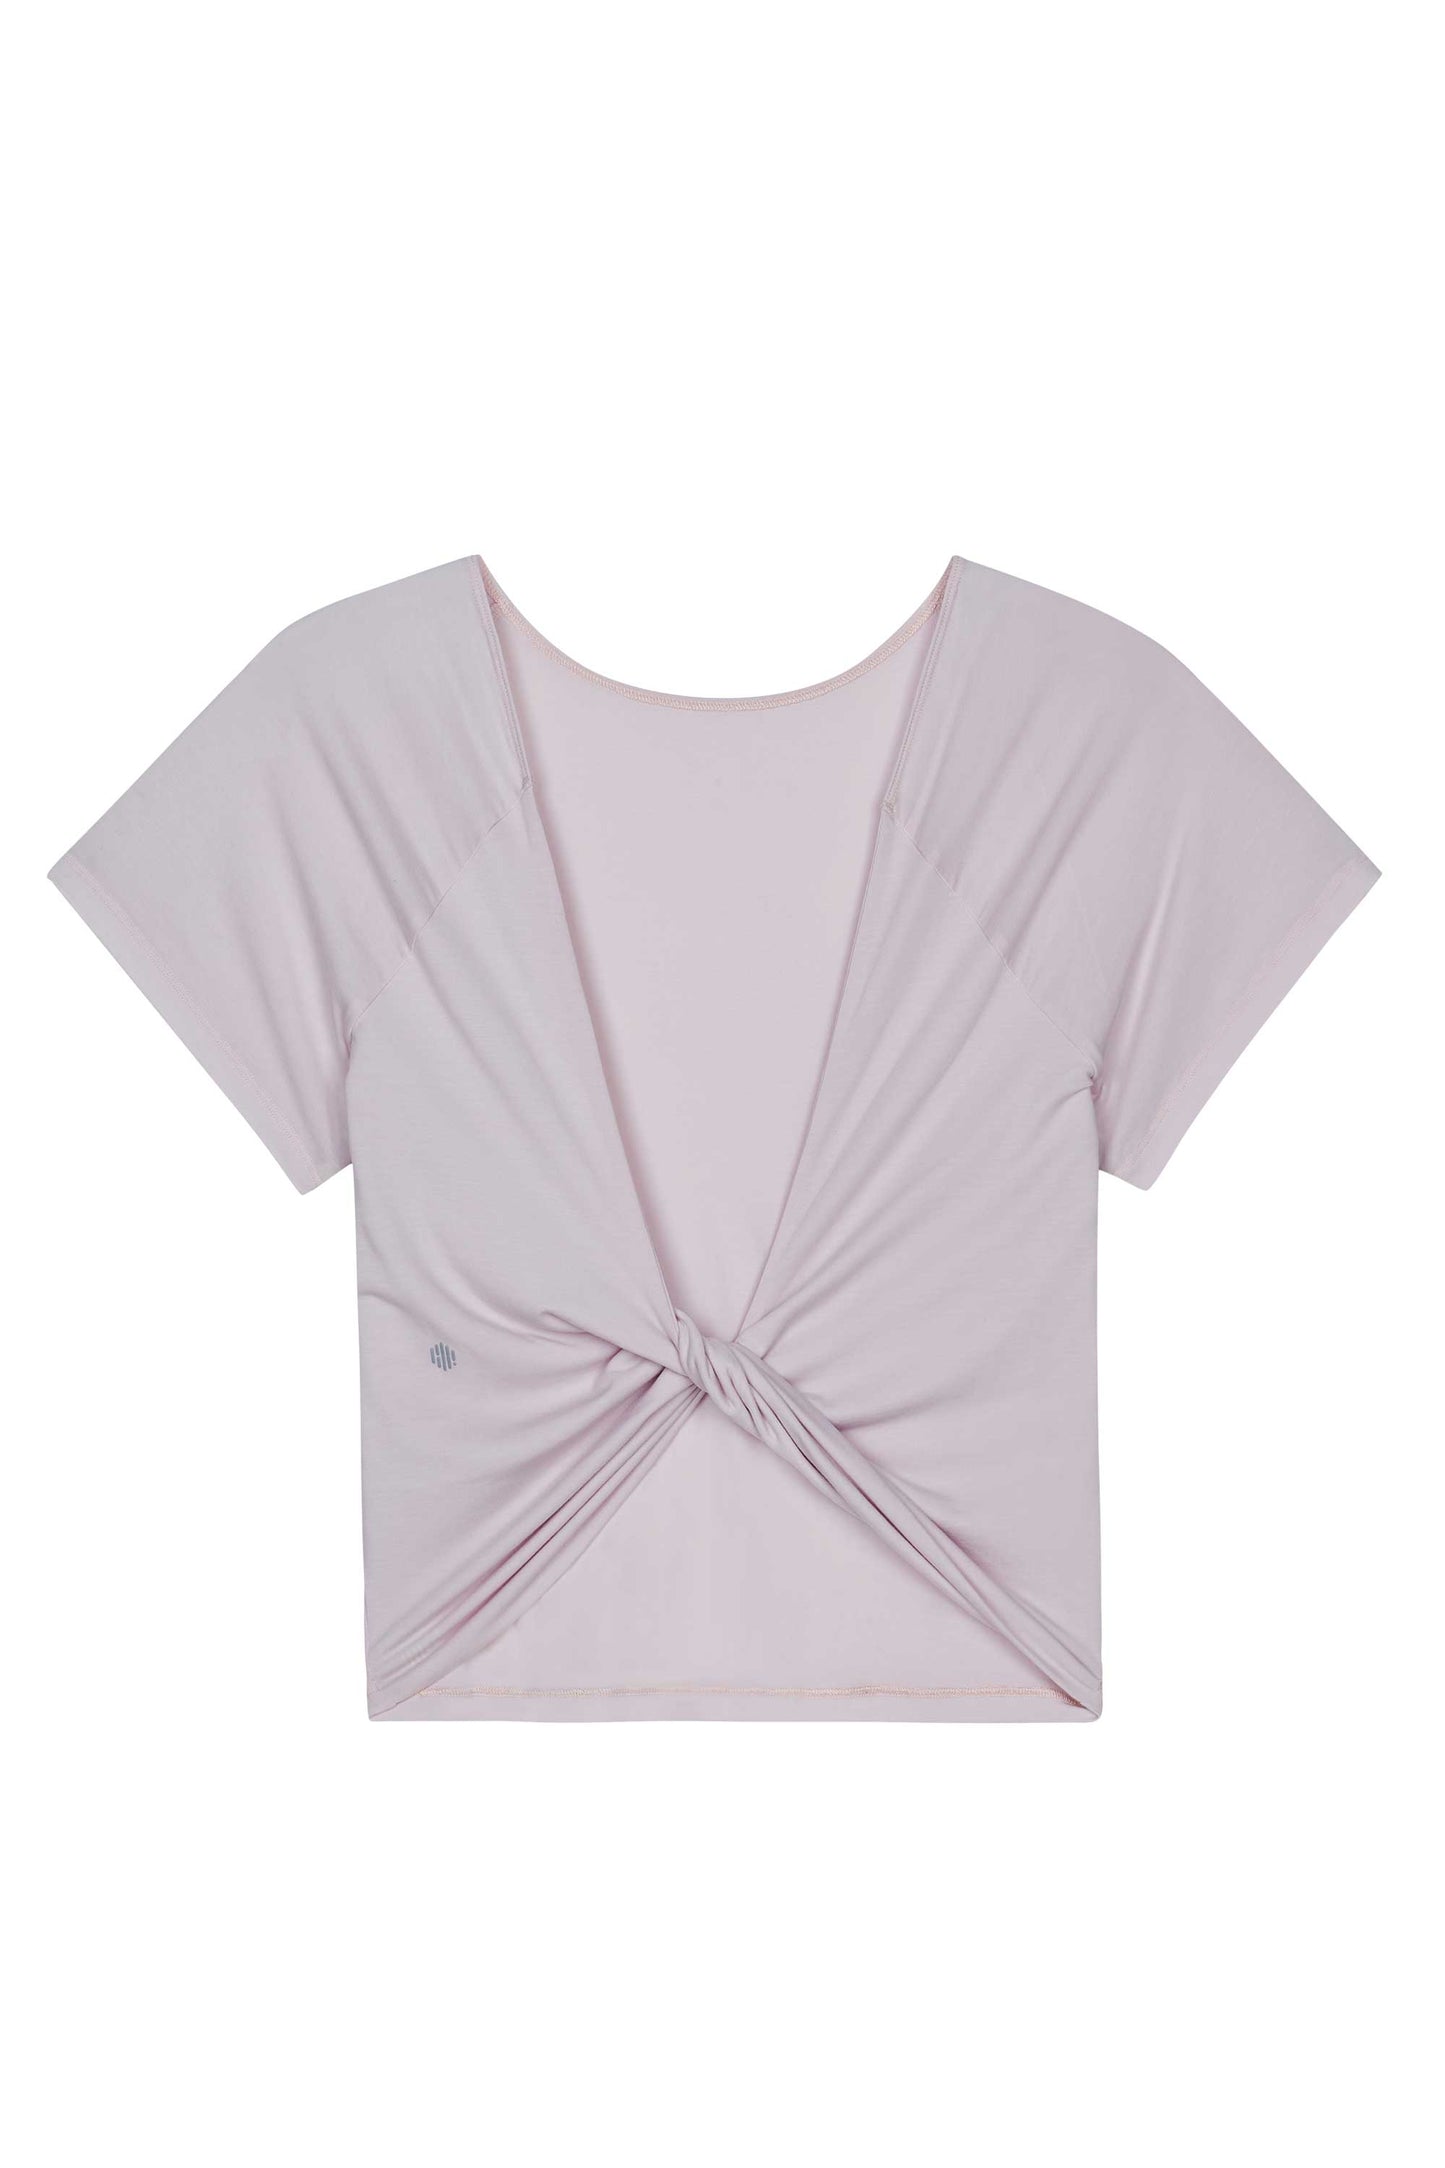 flay lay image of pink t-shirt with front knot